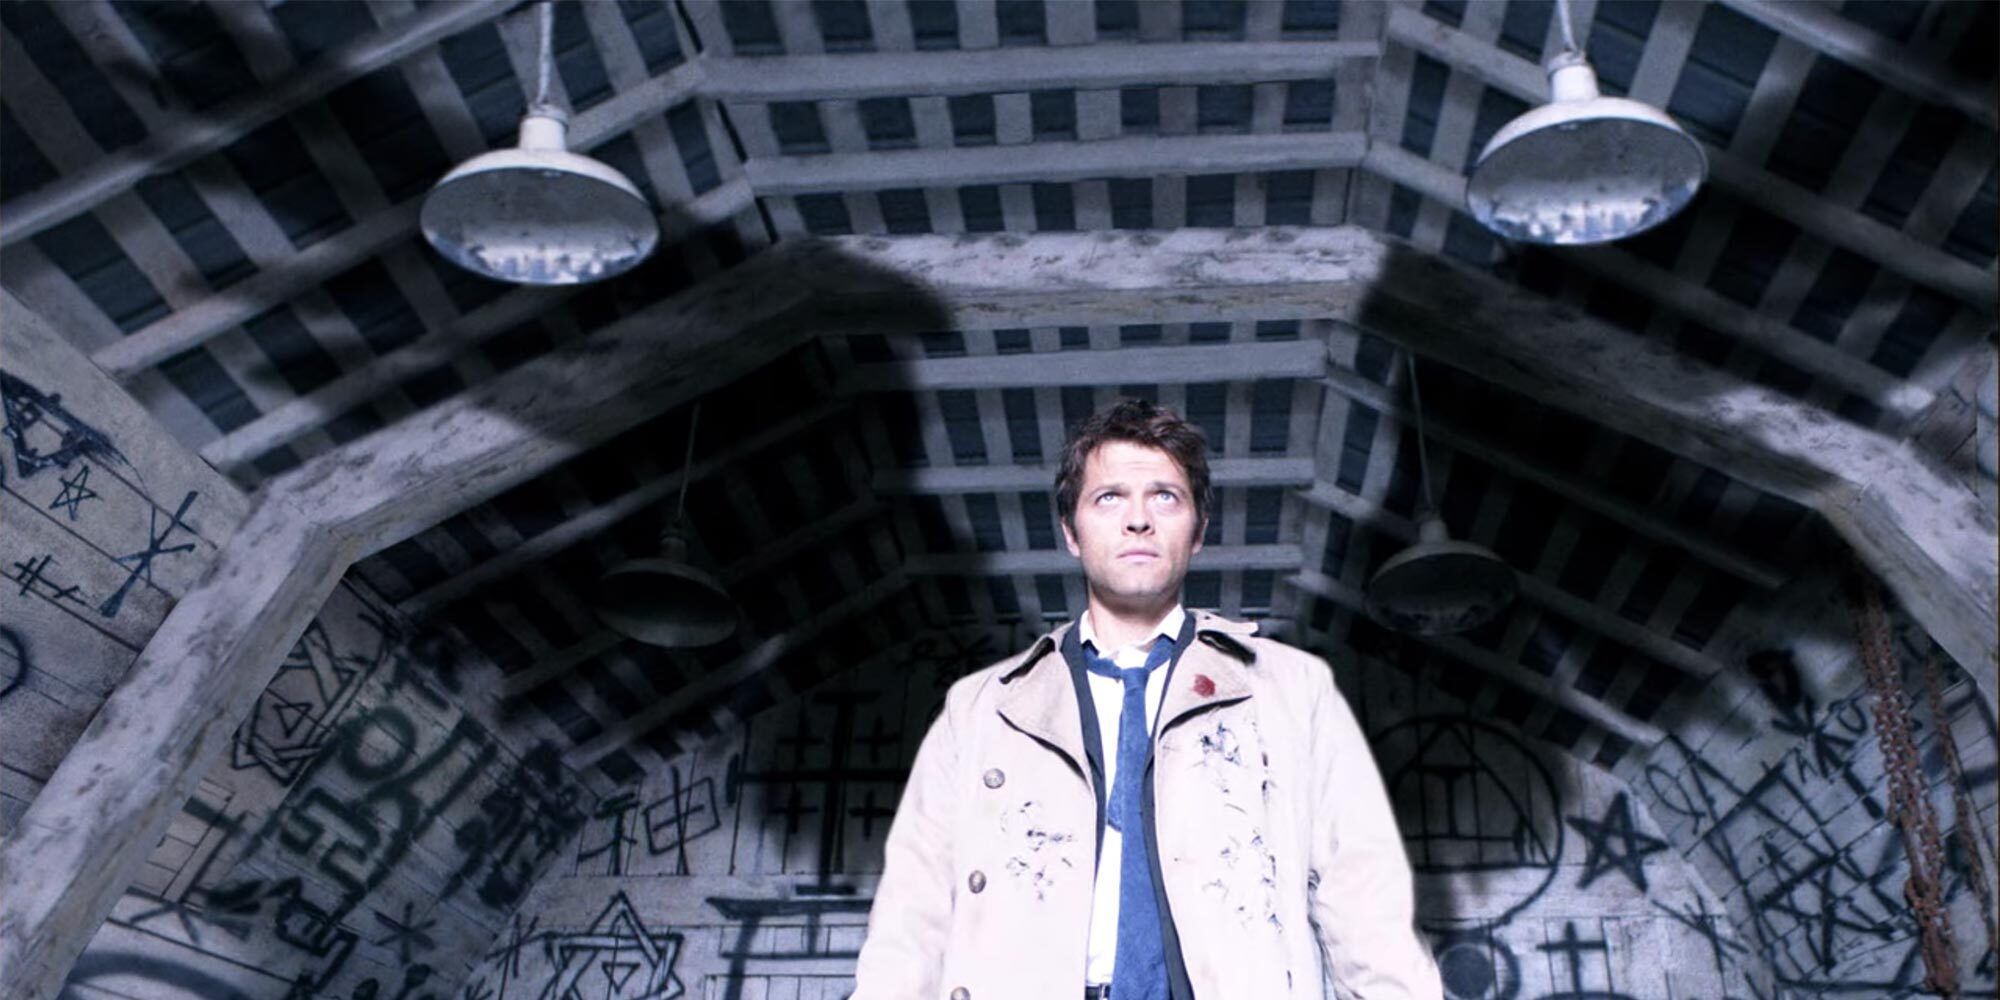 Castiel, wings exposed, with angel and devil traps on the walls around him.